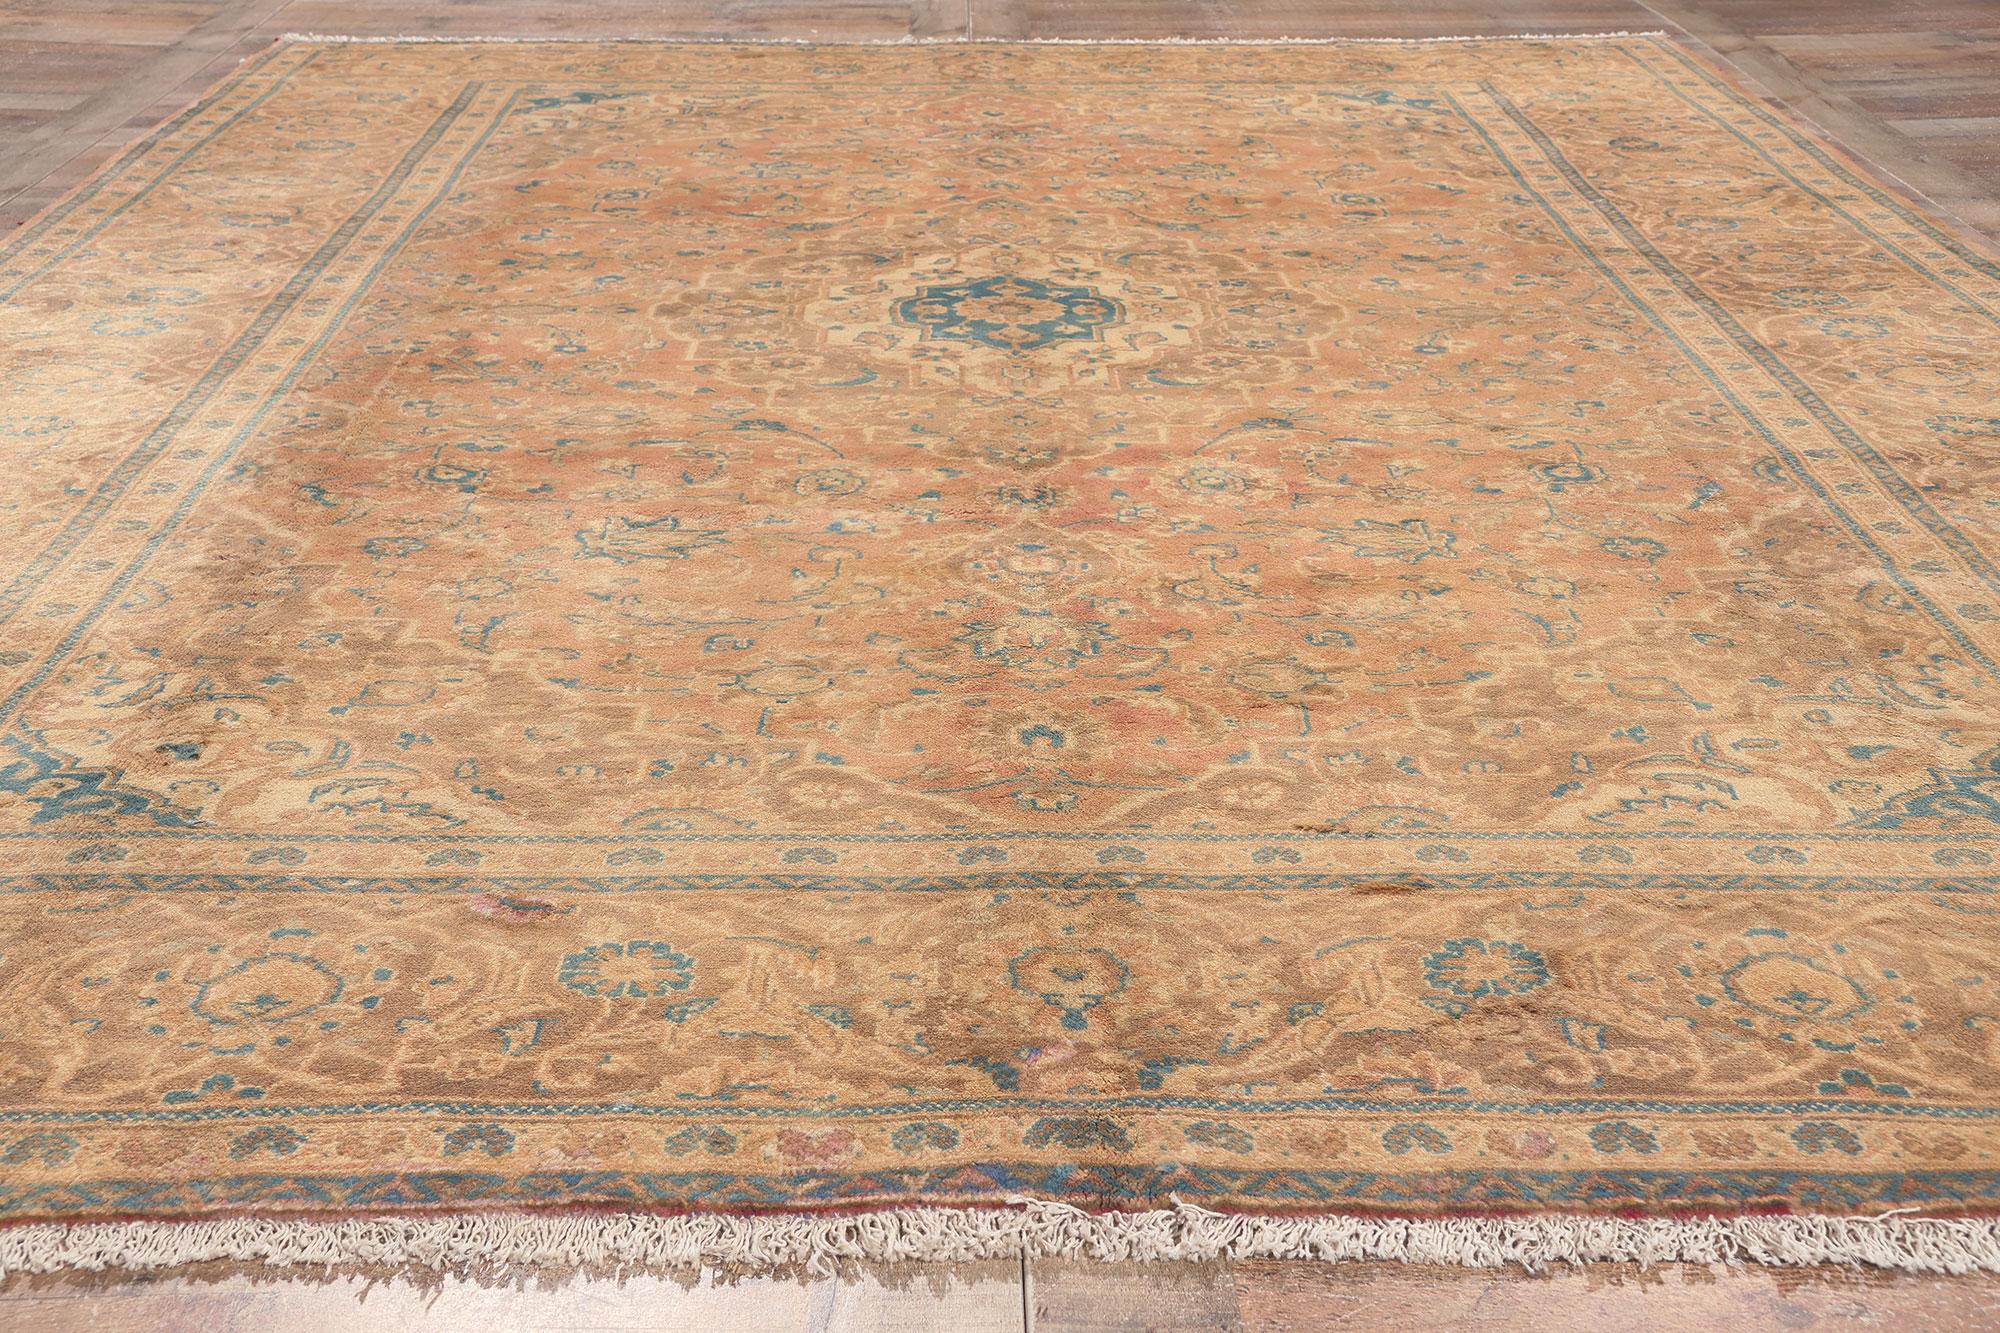 Vintage Persian Yazd Rug, Timeless Italian Appeal Meets Sunbaked Elegance In Good Condition For Sale In Dallas, TX